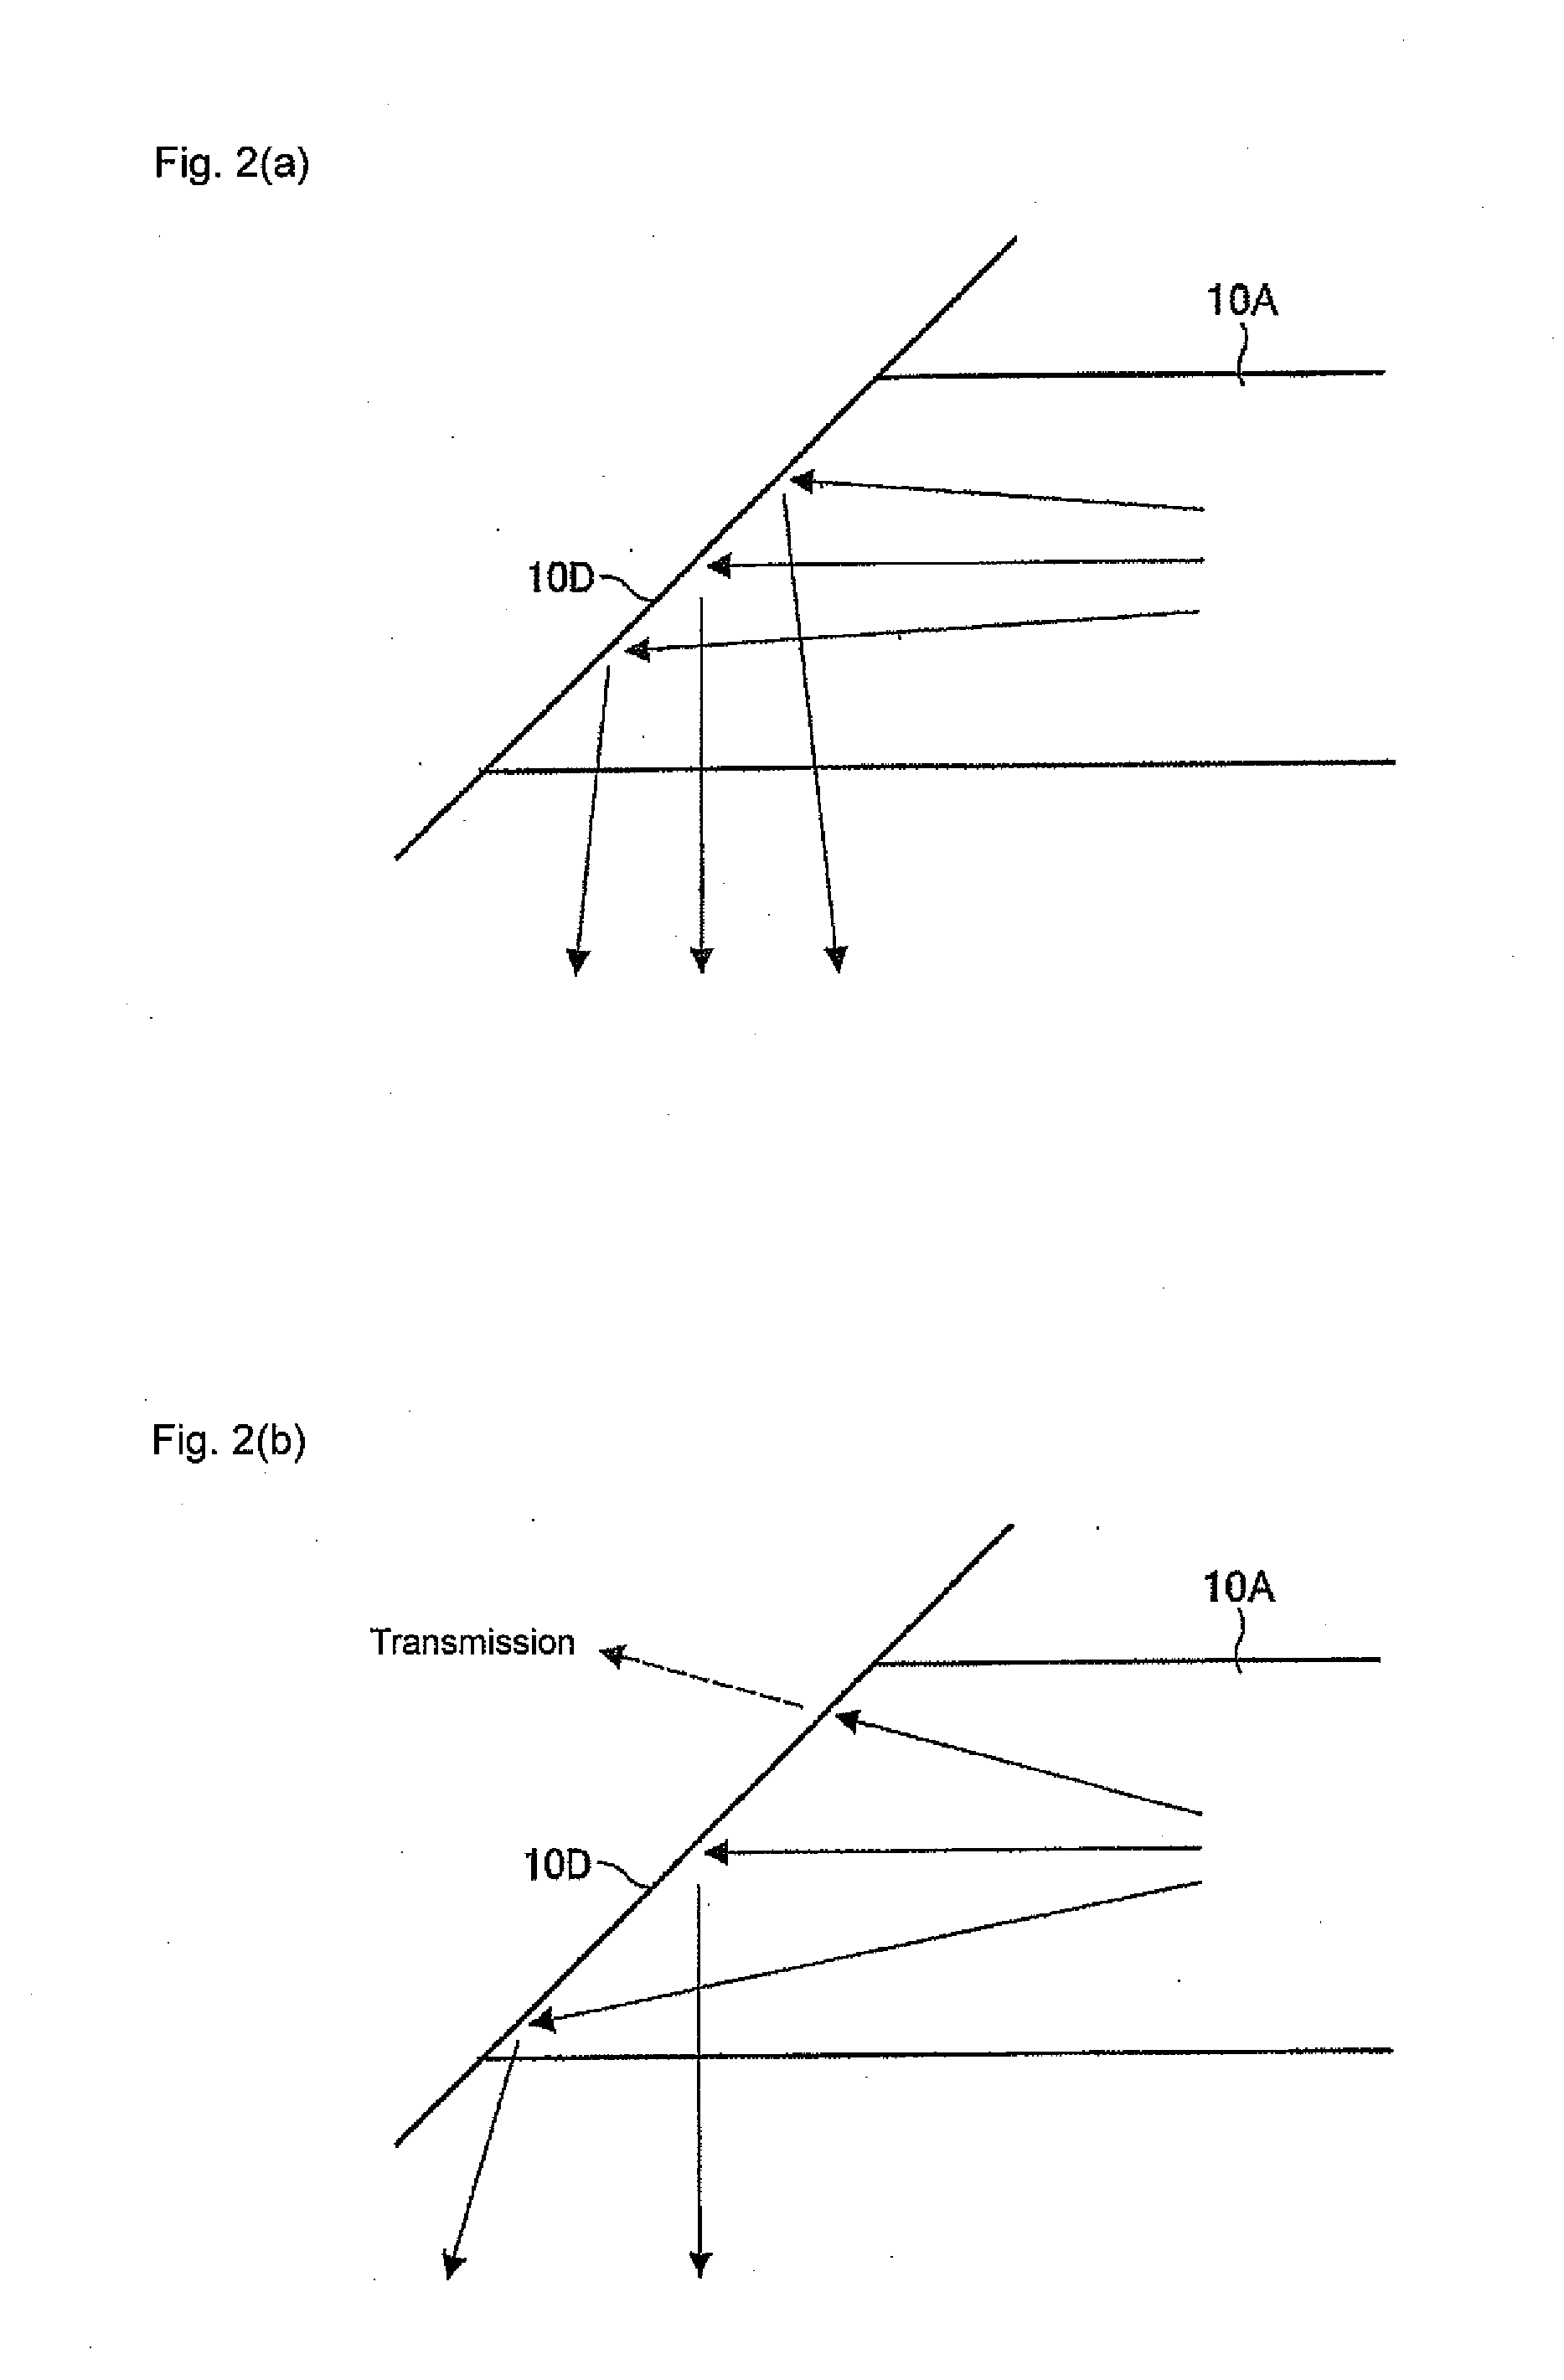 Optical cable module and apparatus employing it